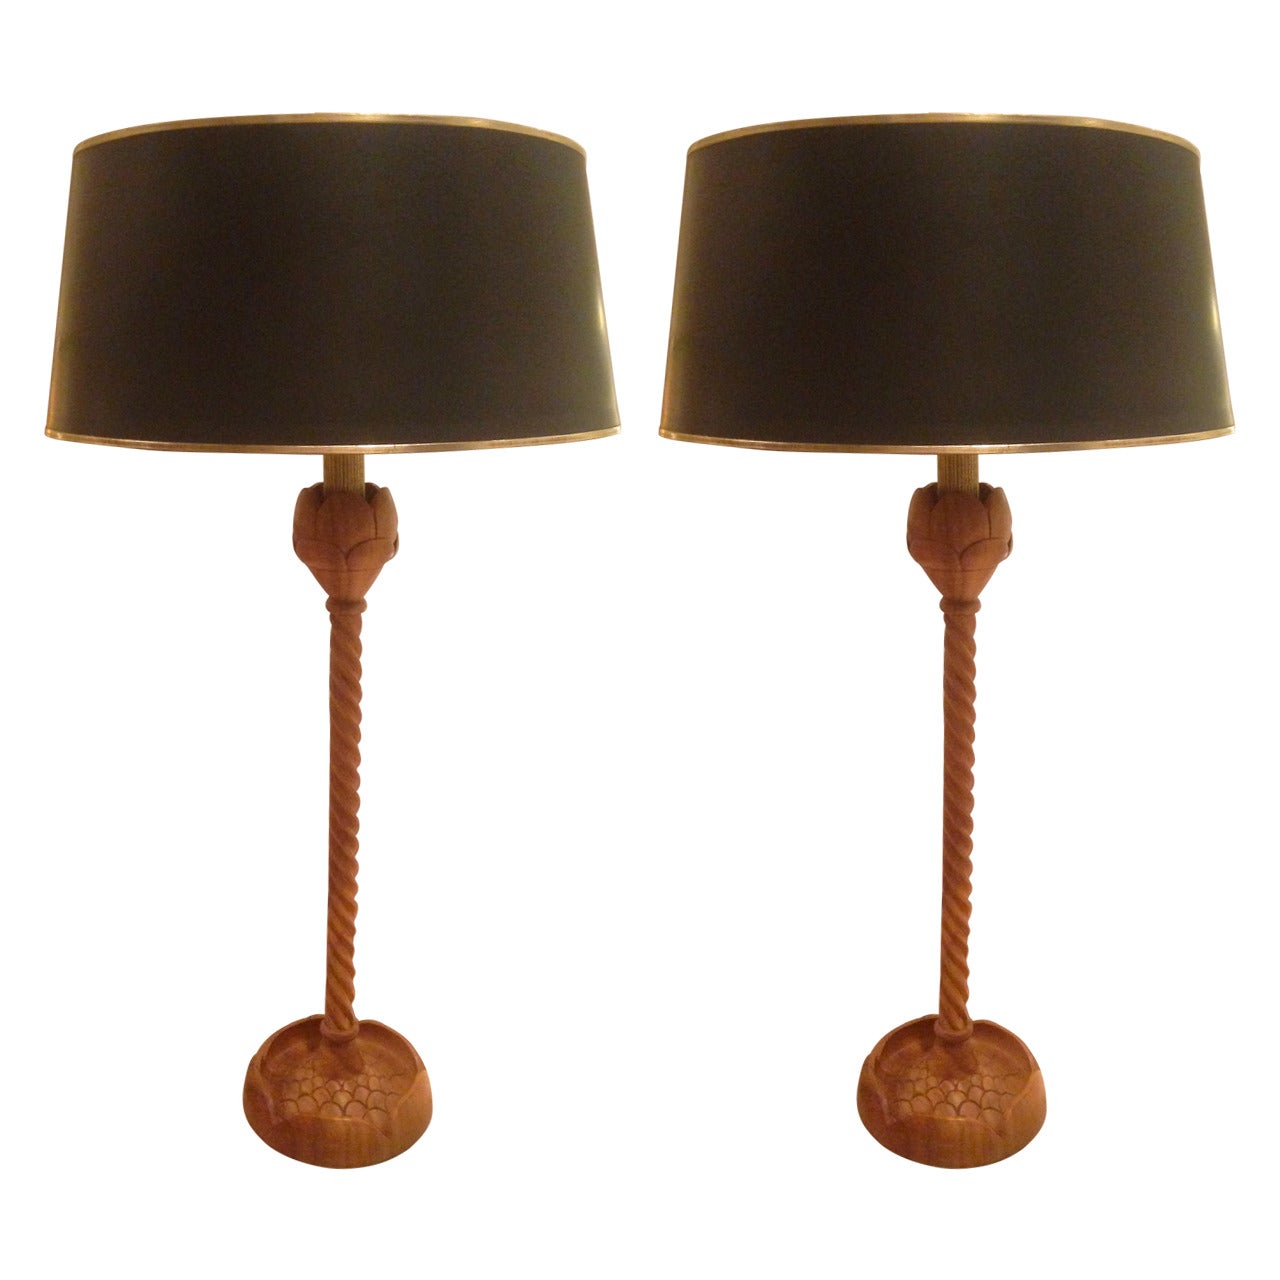 Pair of Large-Scale Table Lamps by Arthur Court